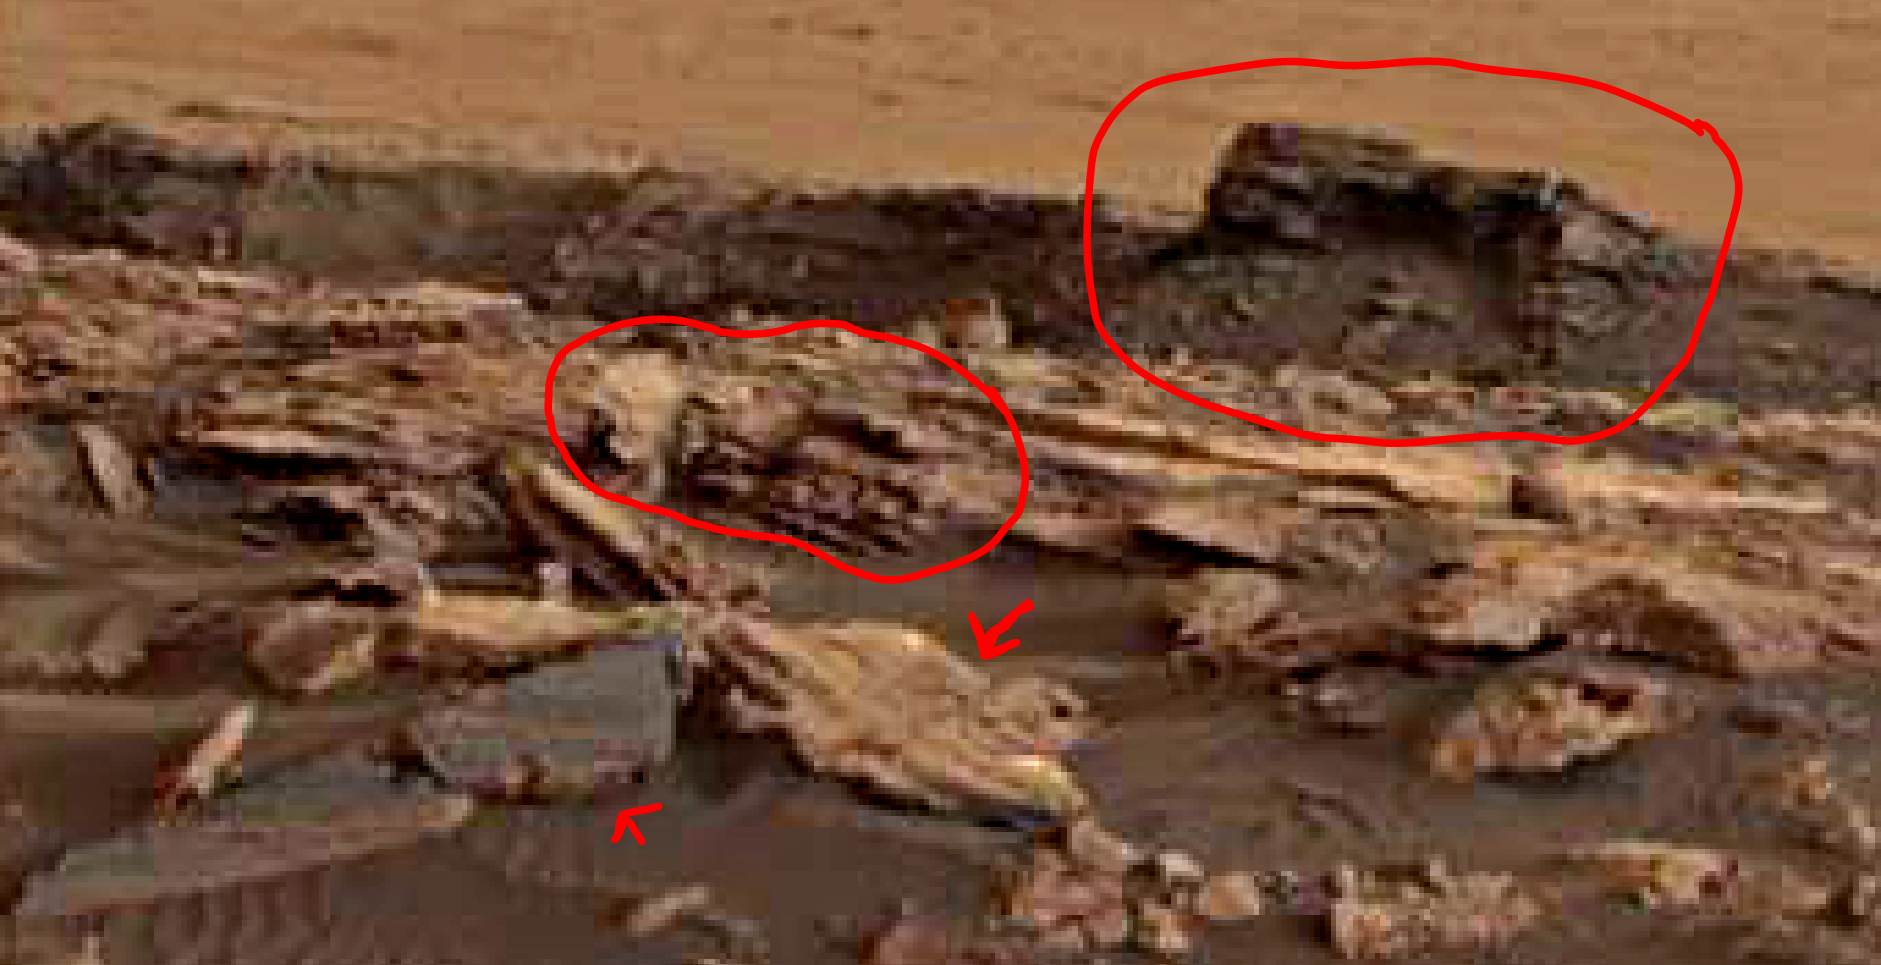 mars-sol-1508-anomaly-artifacts-1a-was-life-on-mars